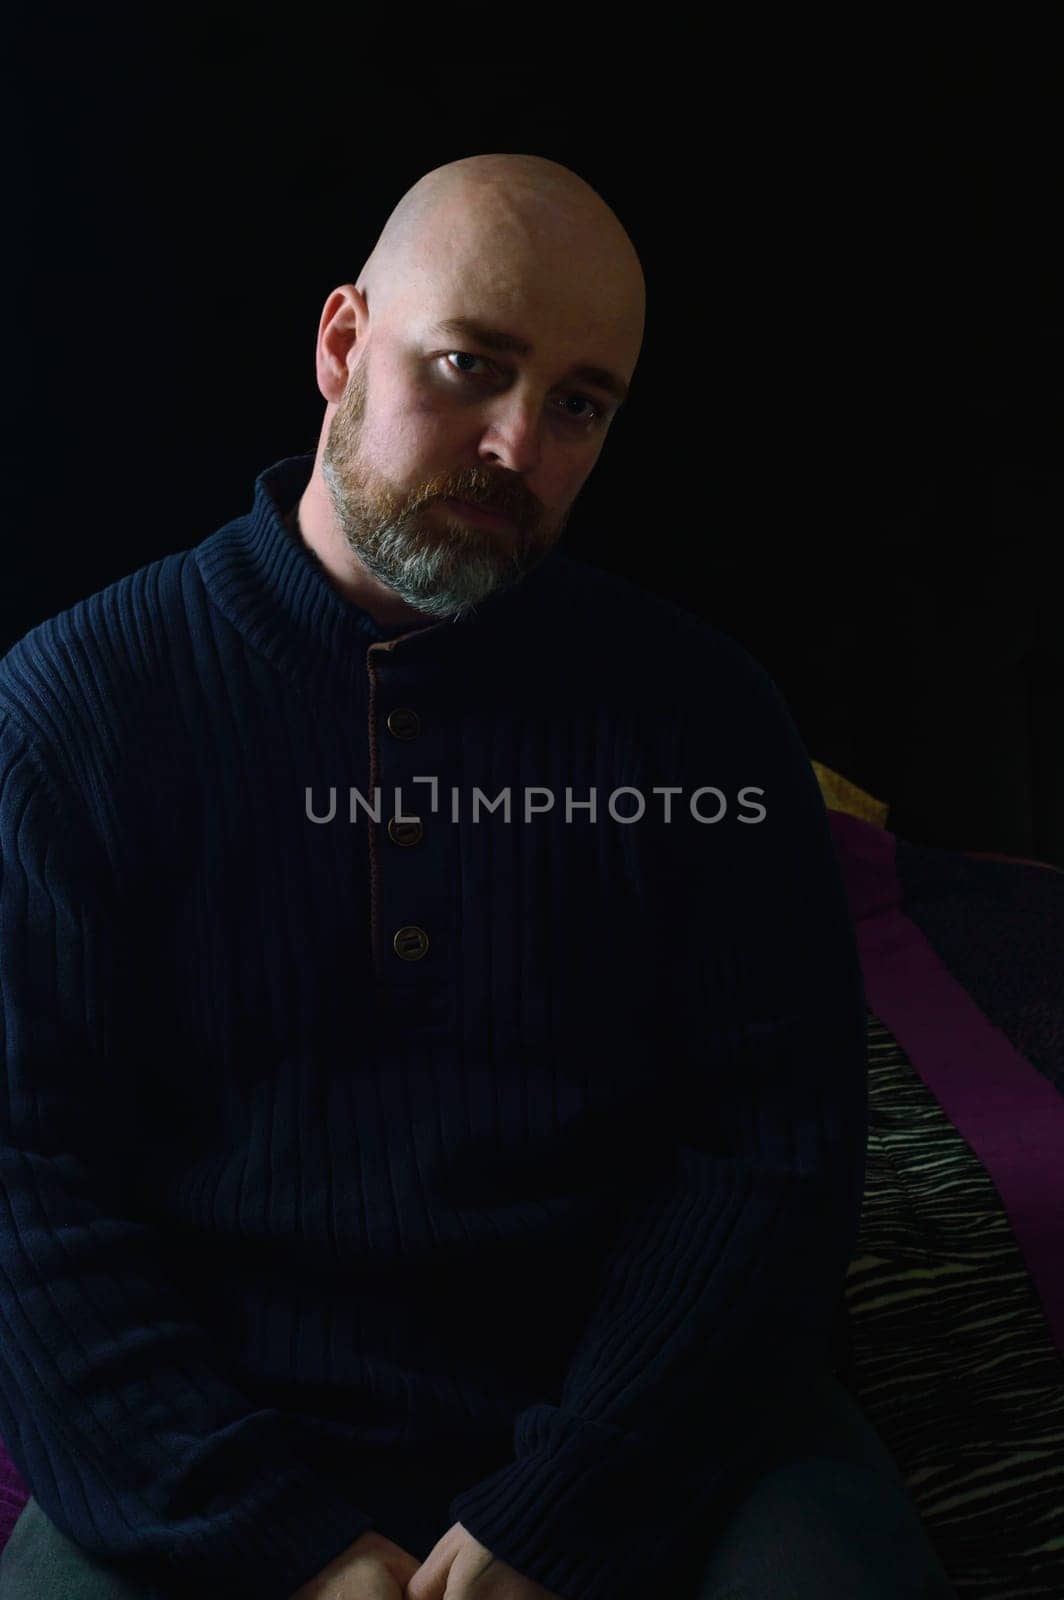 Well Dressed Caucasian Male in Dark Clothes on Dark Background Looking at Camera by RobertPB